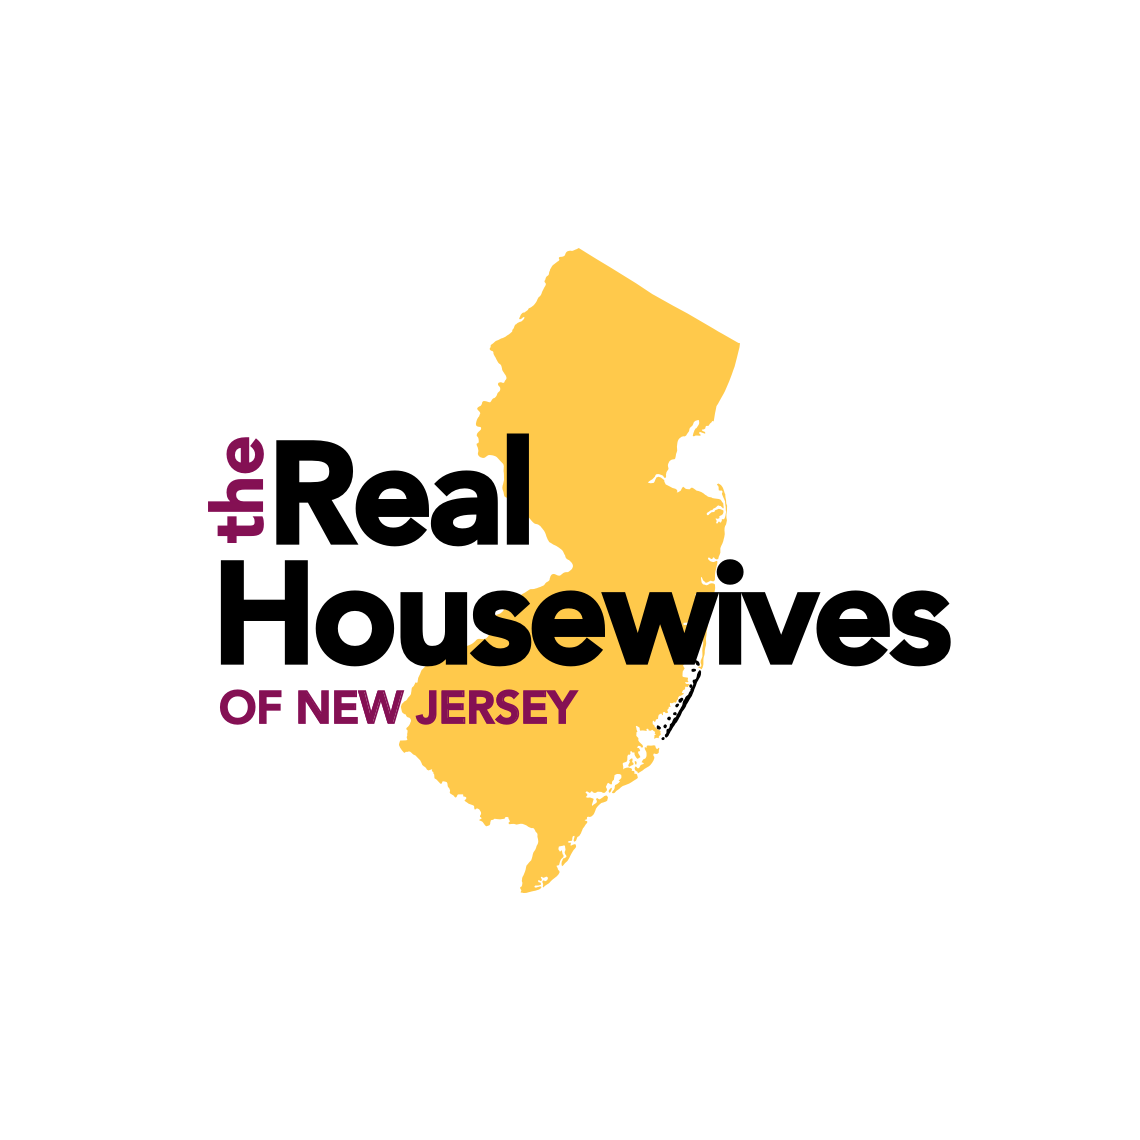 The Real Housewives of New Jersey - How to watch NEW season 9 online!